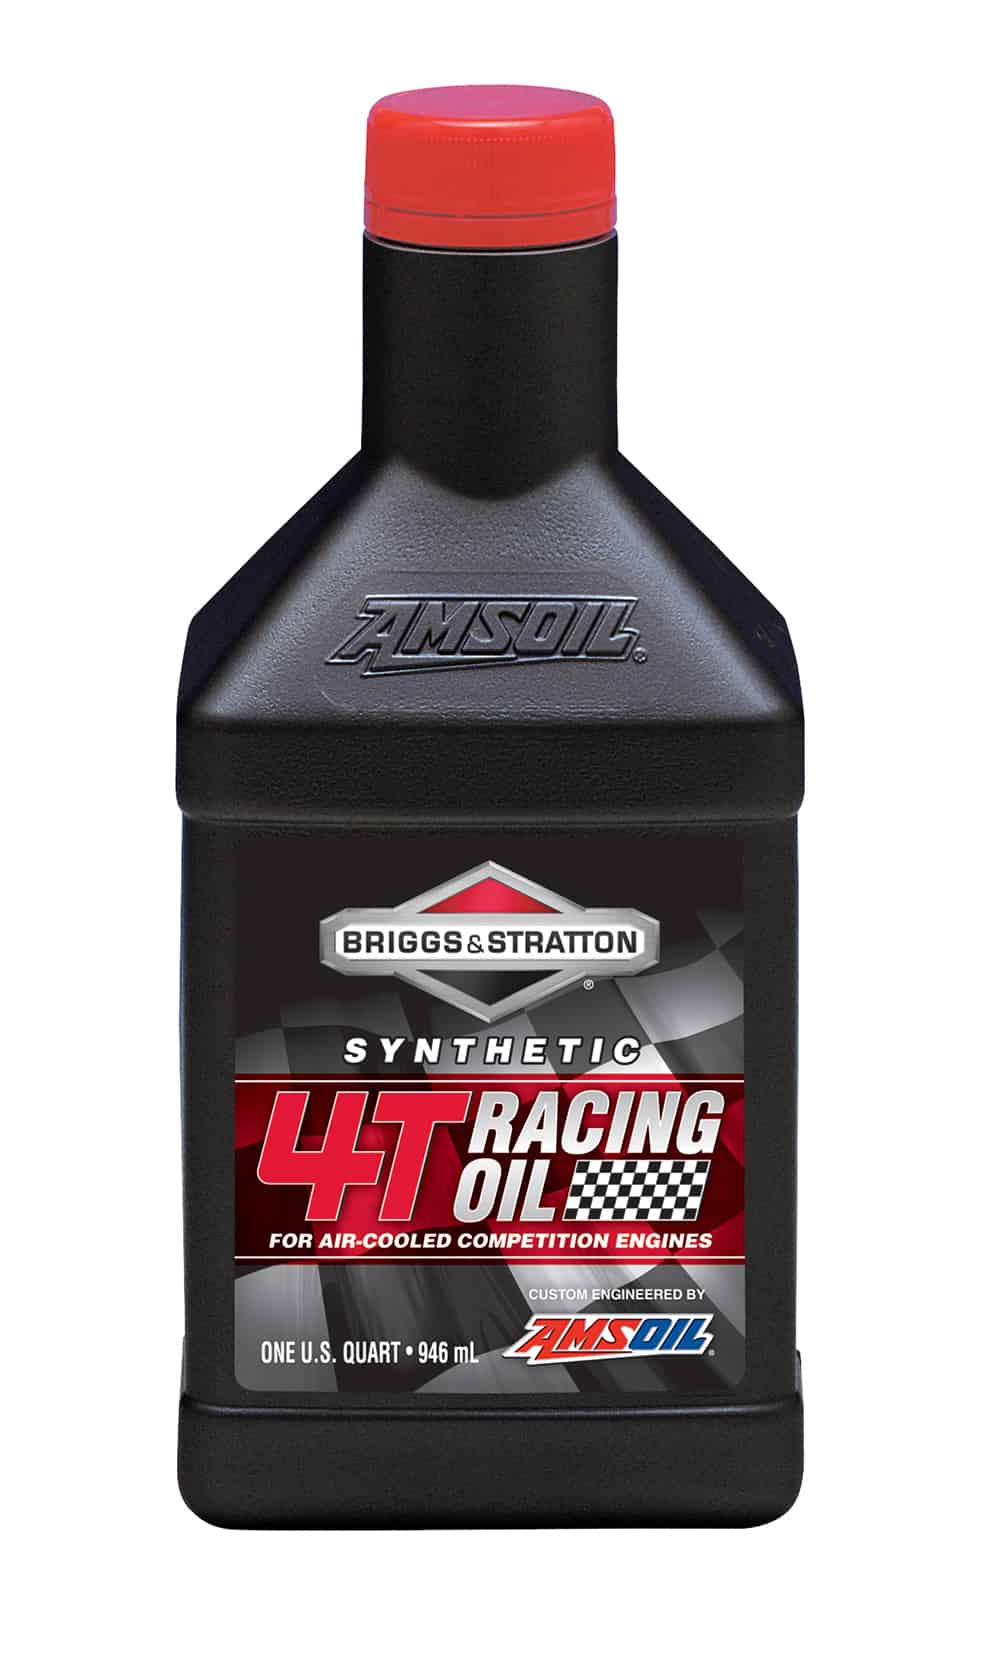 A bottle of Synthetic 4T Racing Oil, which is engineered for competition engines without the shortcomings of automotive, PAG or conventional karting oils.